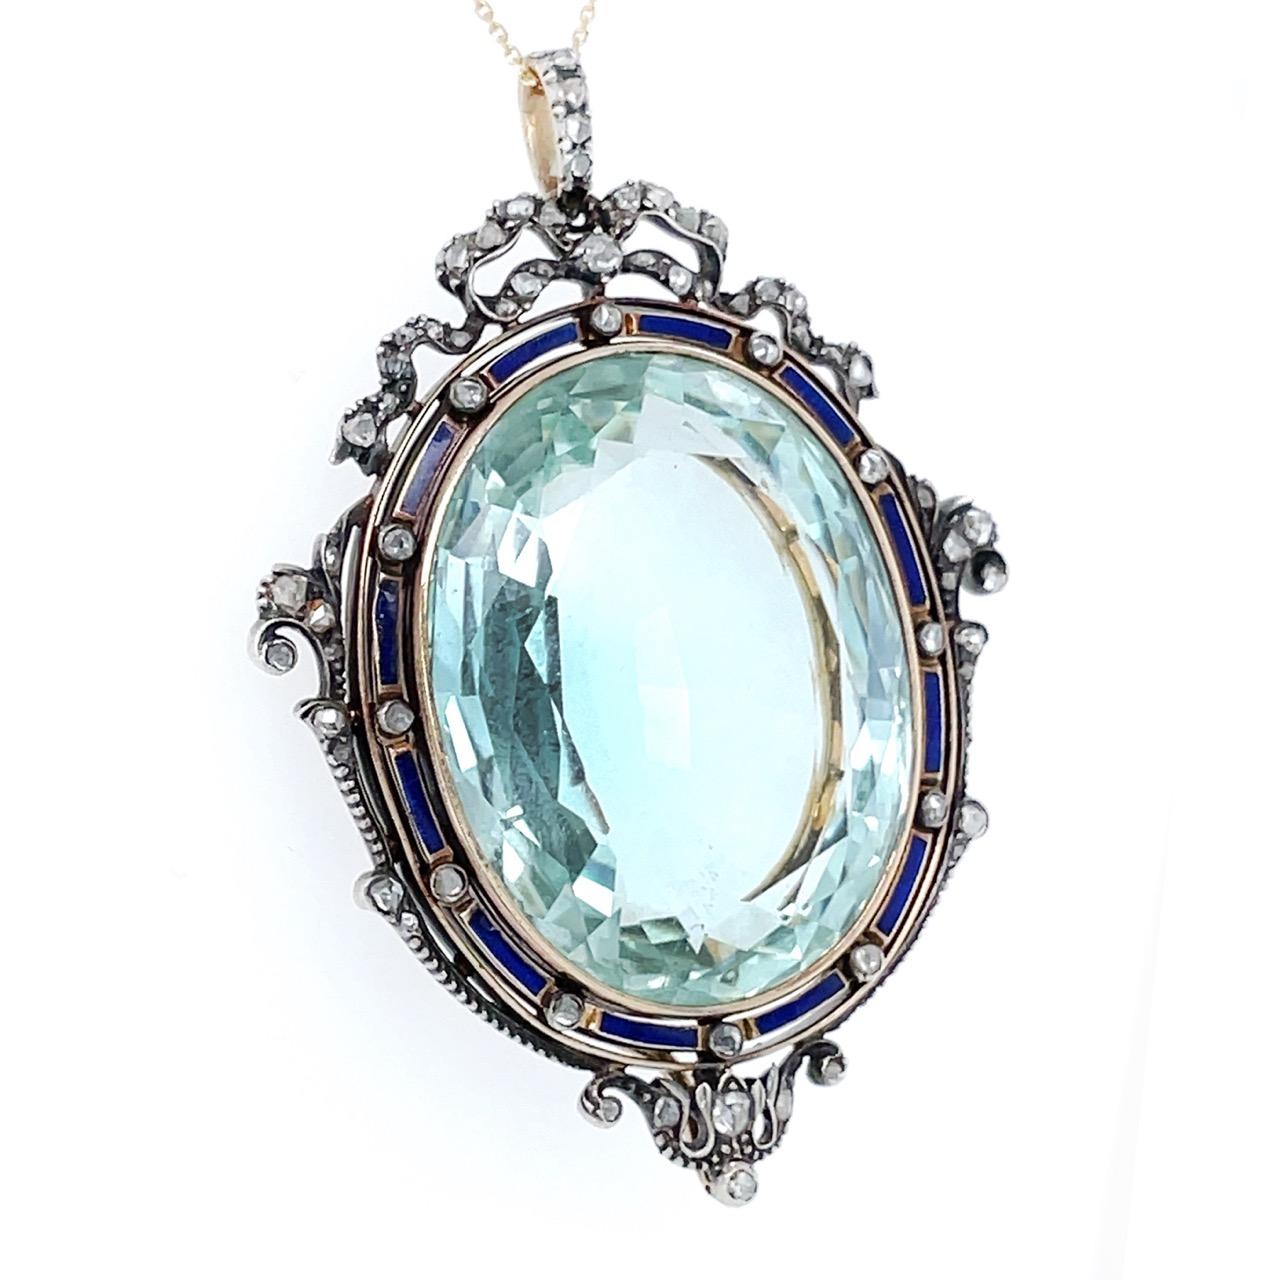 Victorian Aquamarine and Diamond Pendant, ca. 1860s

A large aquamarine pendant from the Victorian era (ca. 1860s). The aquamarine weighs ca. 75 carats and has a sea blue color and is almost inclusion free. It is surrounded by a ribbon designed